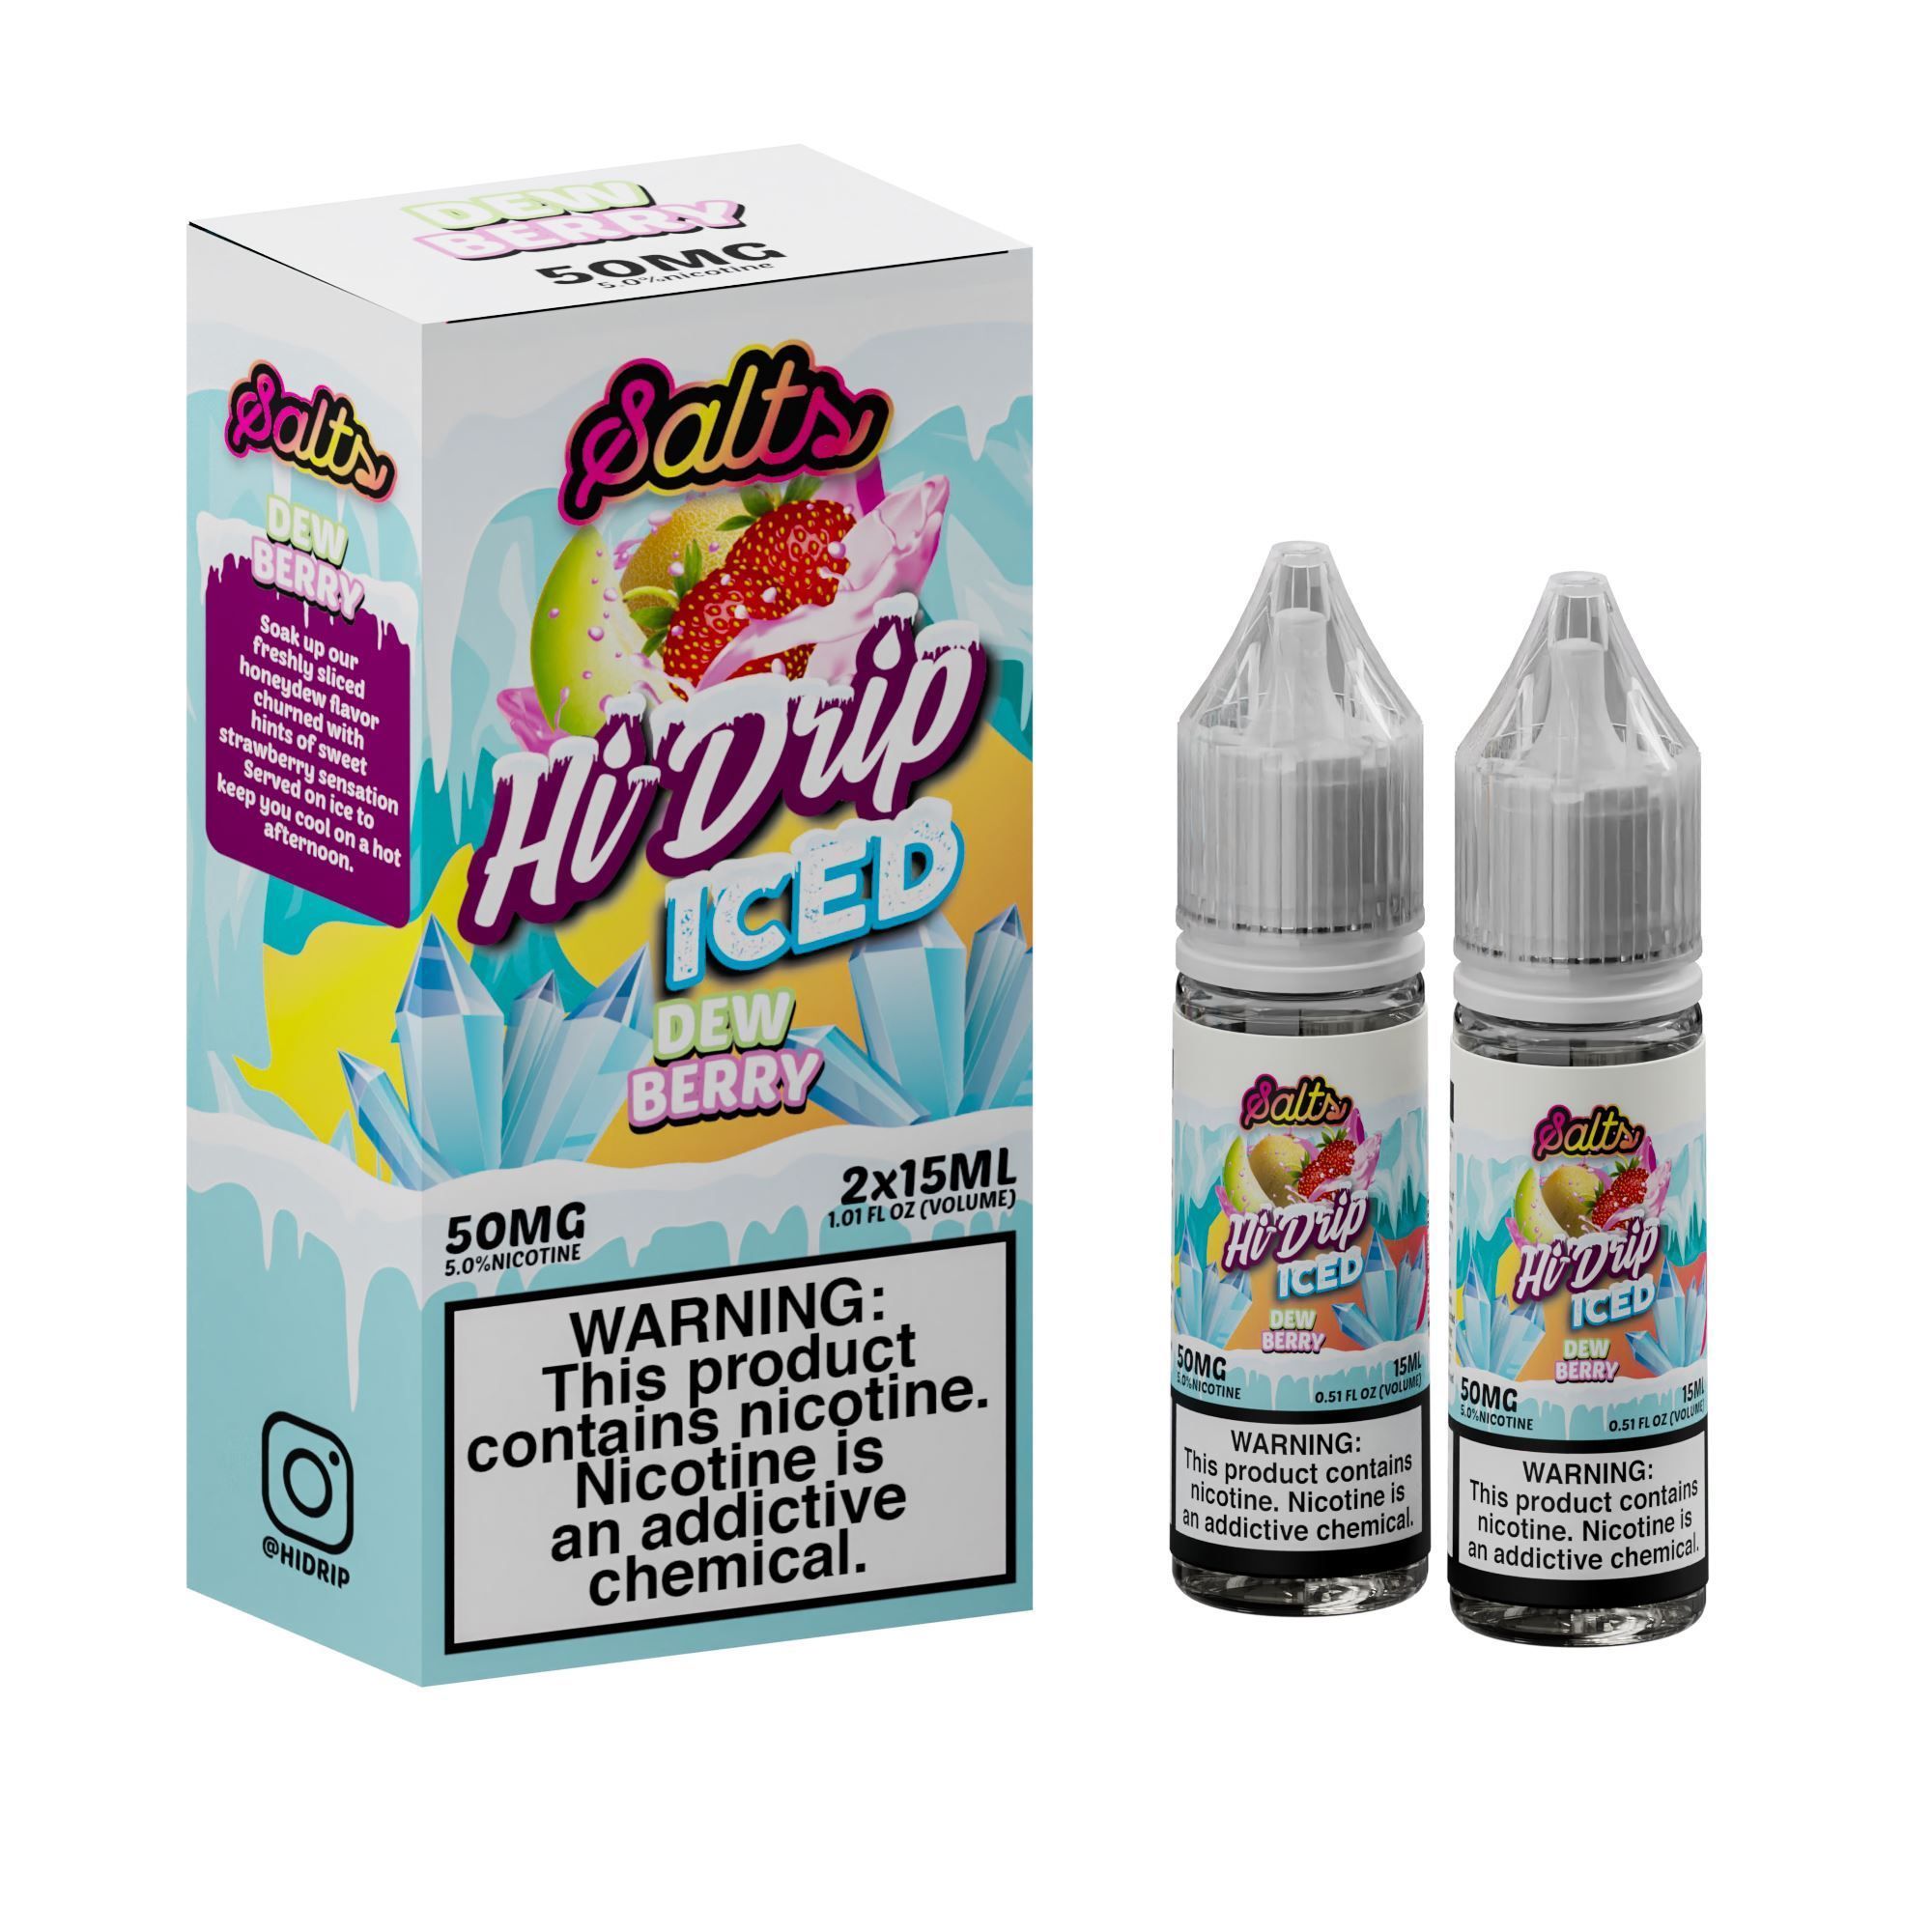 Dewberry Iced (Honeydew Strawberry Iced) by Hi-Drip Salts Series 2x15mL with Packaging